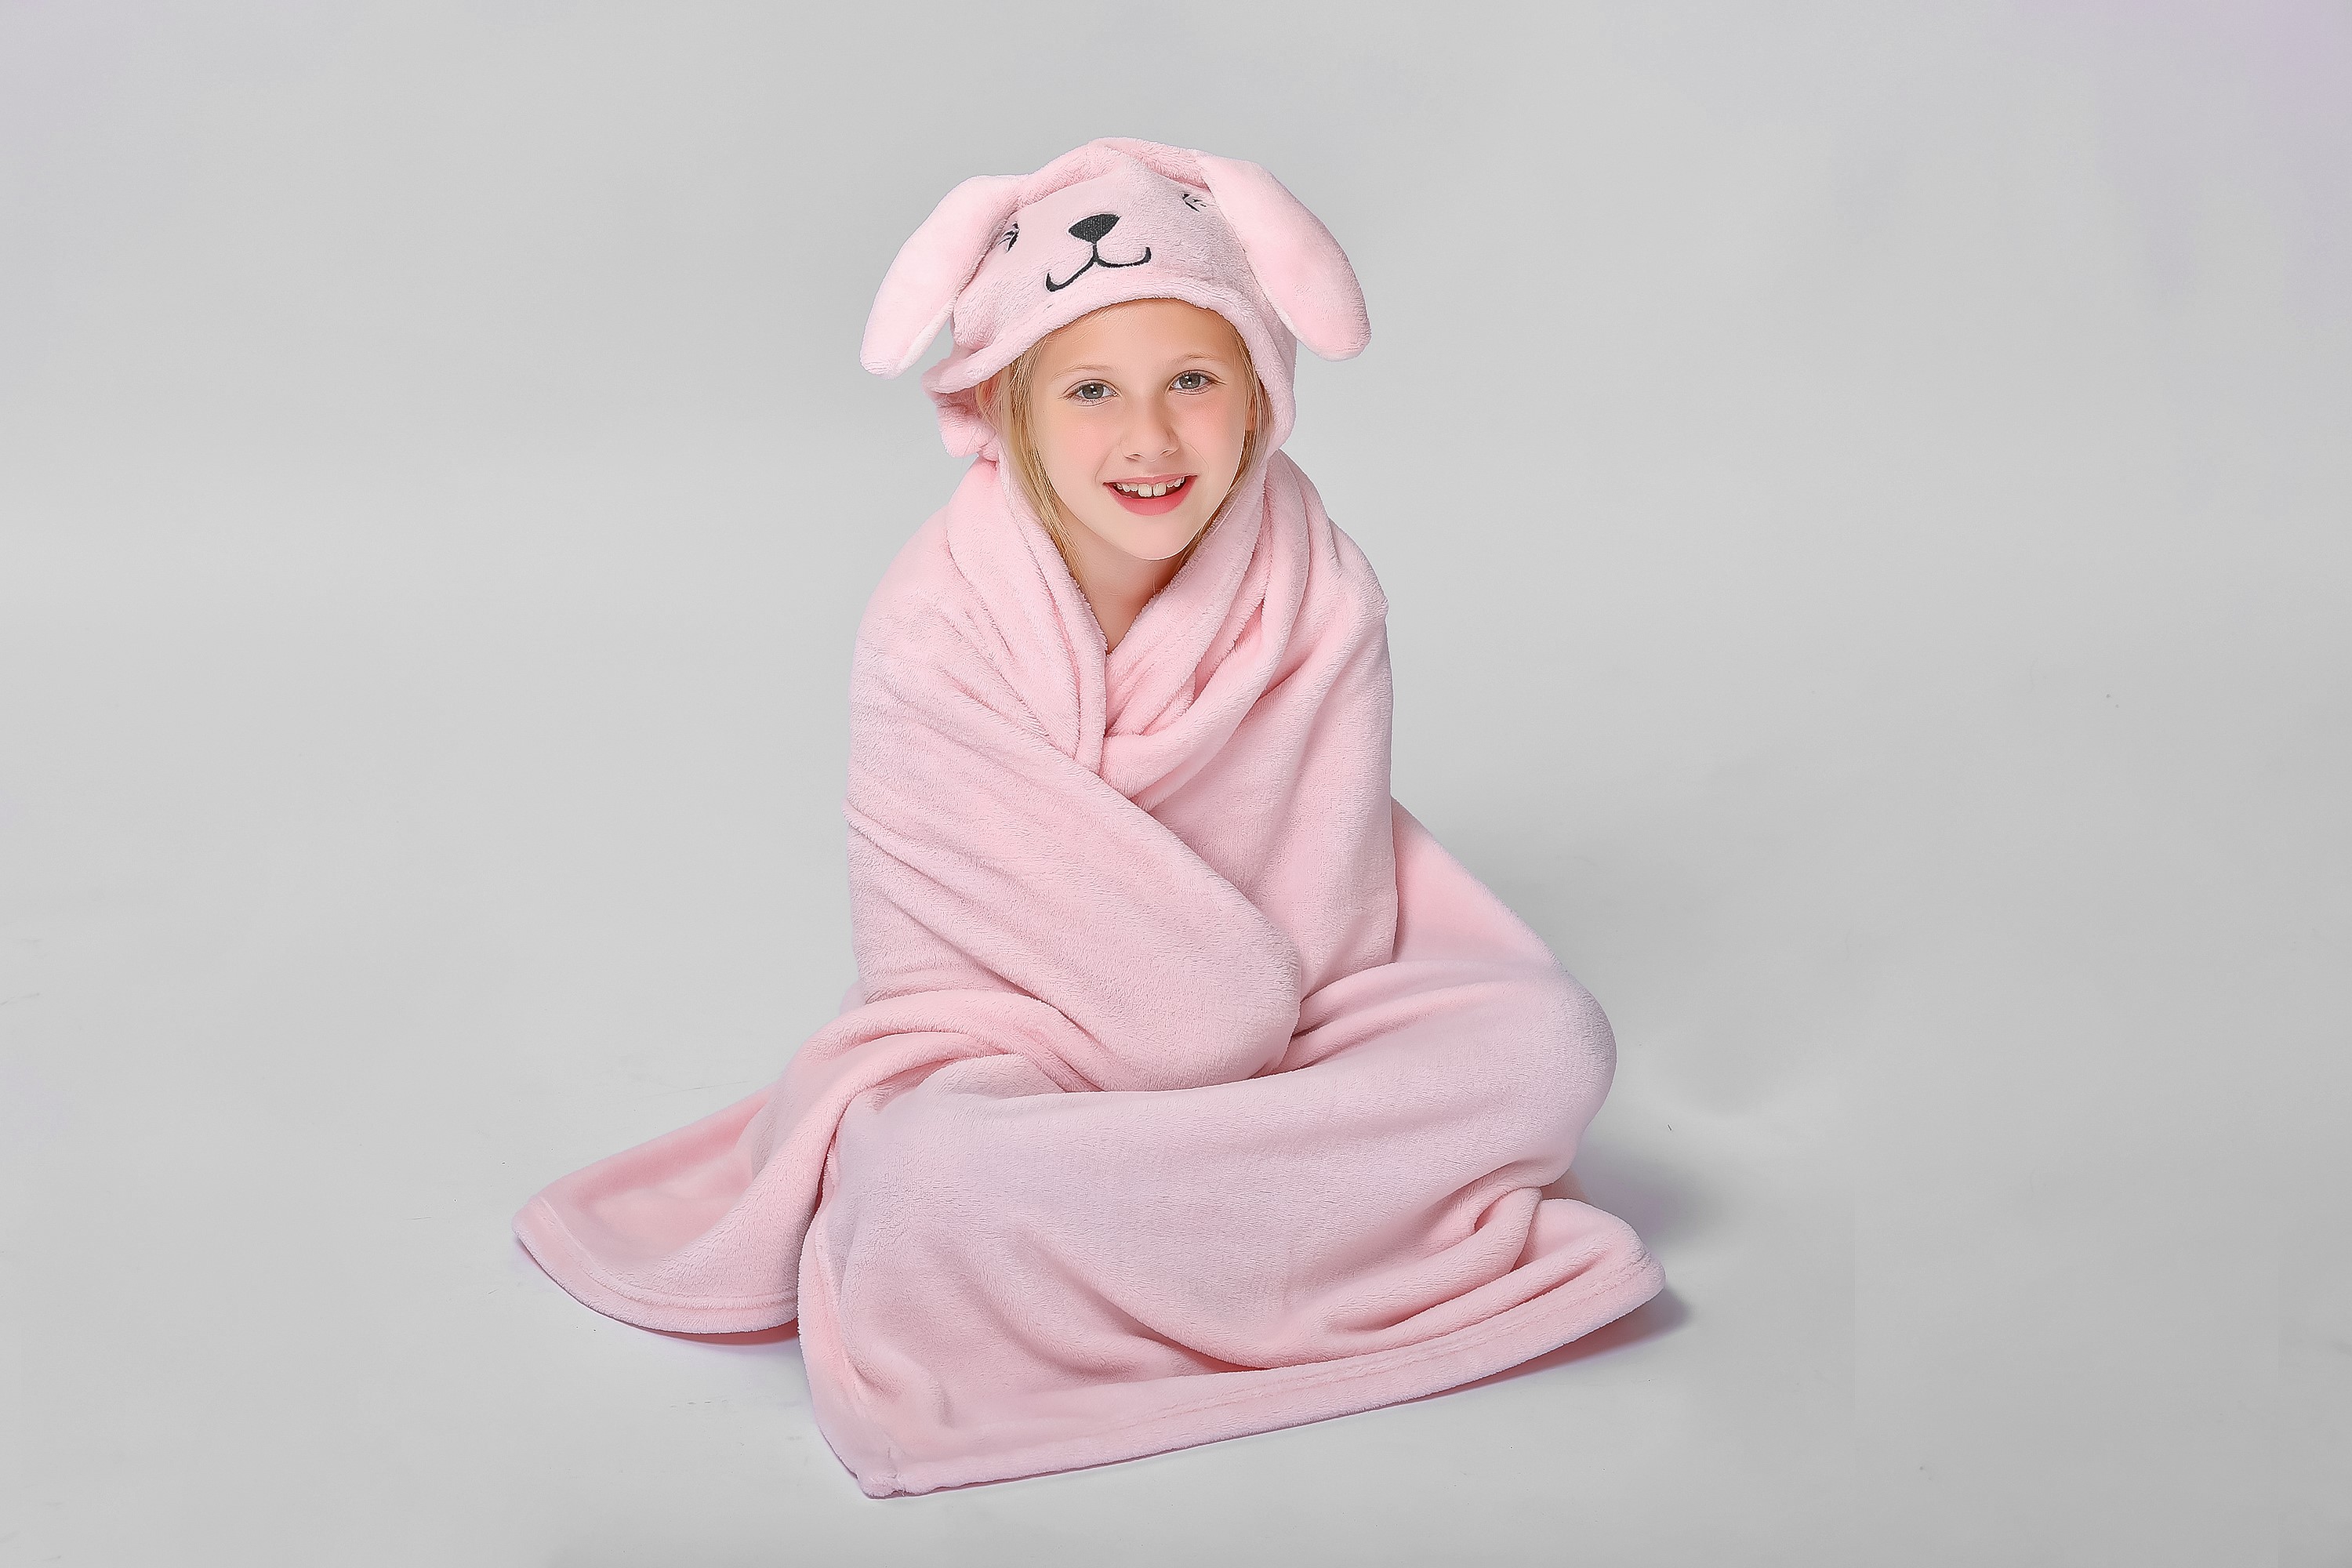 Pink Bunny Hooded Throw for Kids by Down Home - image 1 of 2